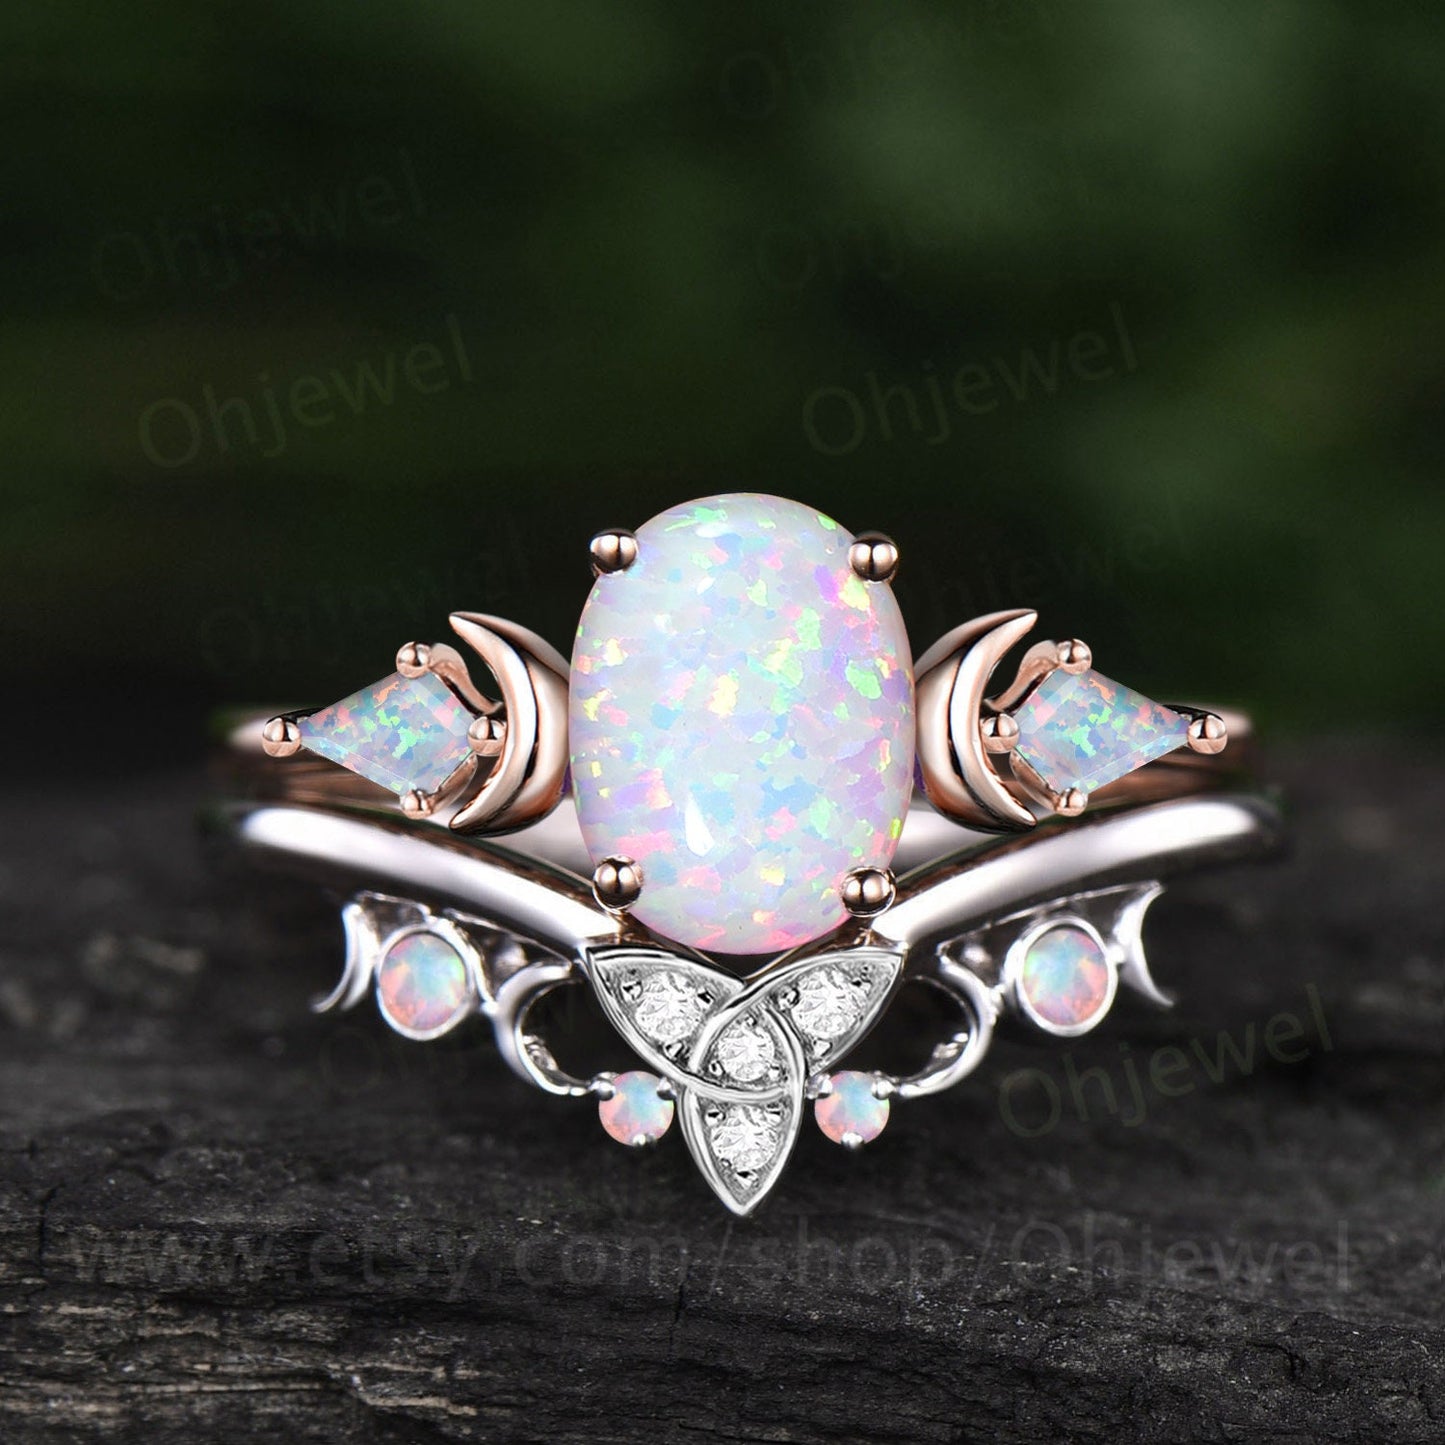 Oval white opal ring rose gold three stone moon unique engagement ring kite opal ring silver celtic knot wedding band women gift jewelry